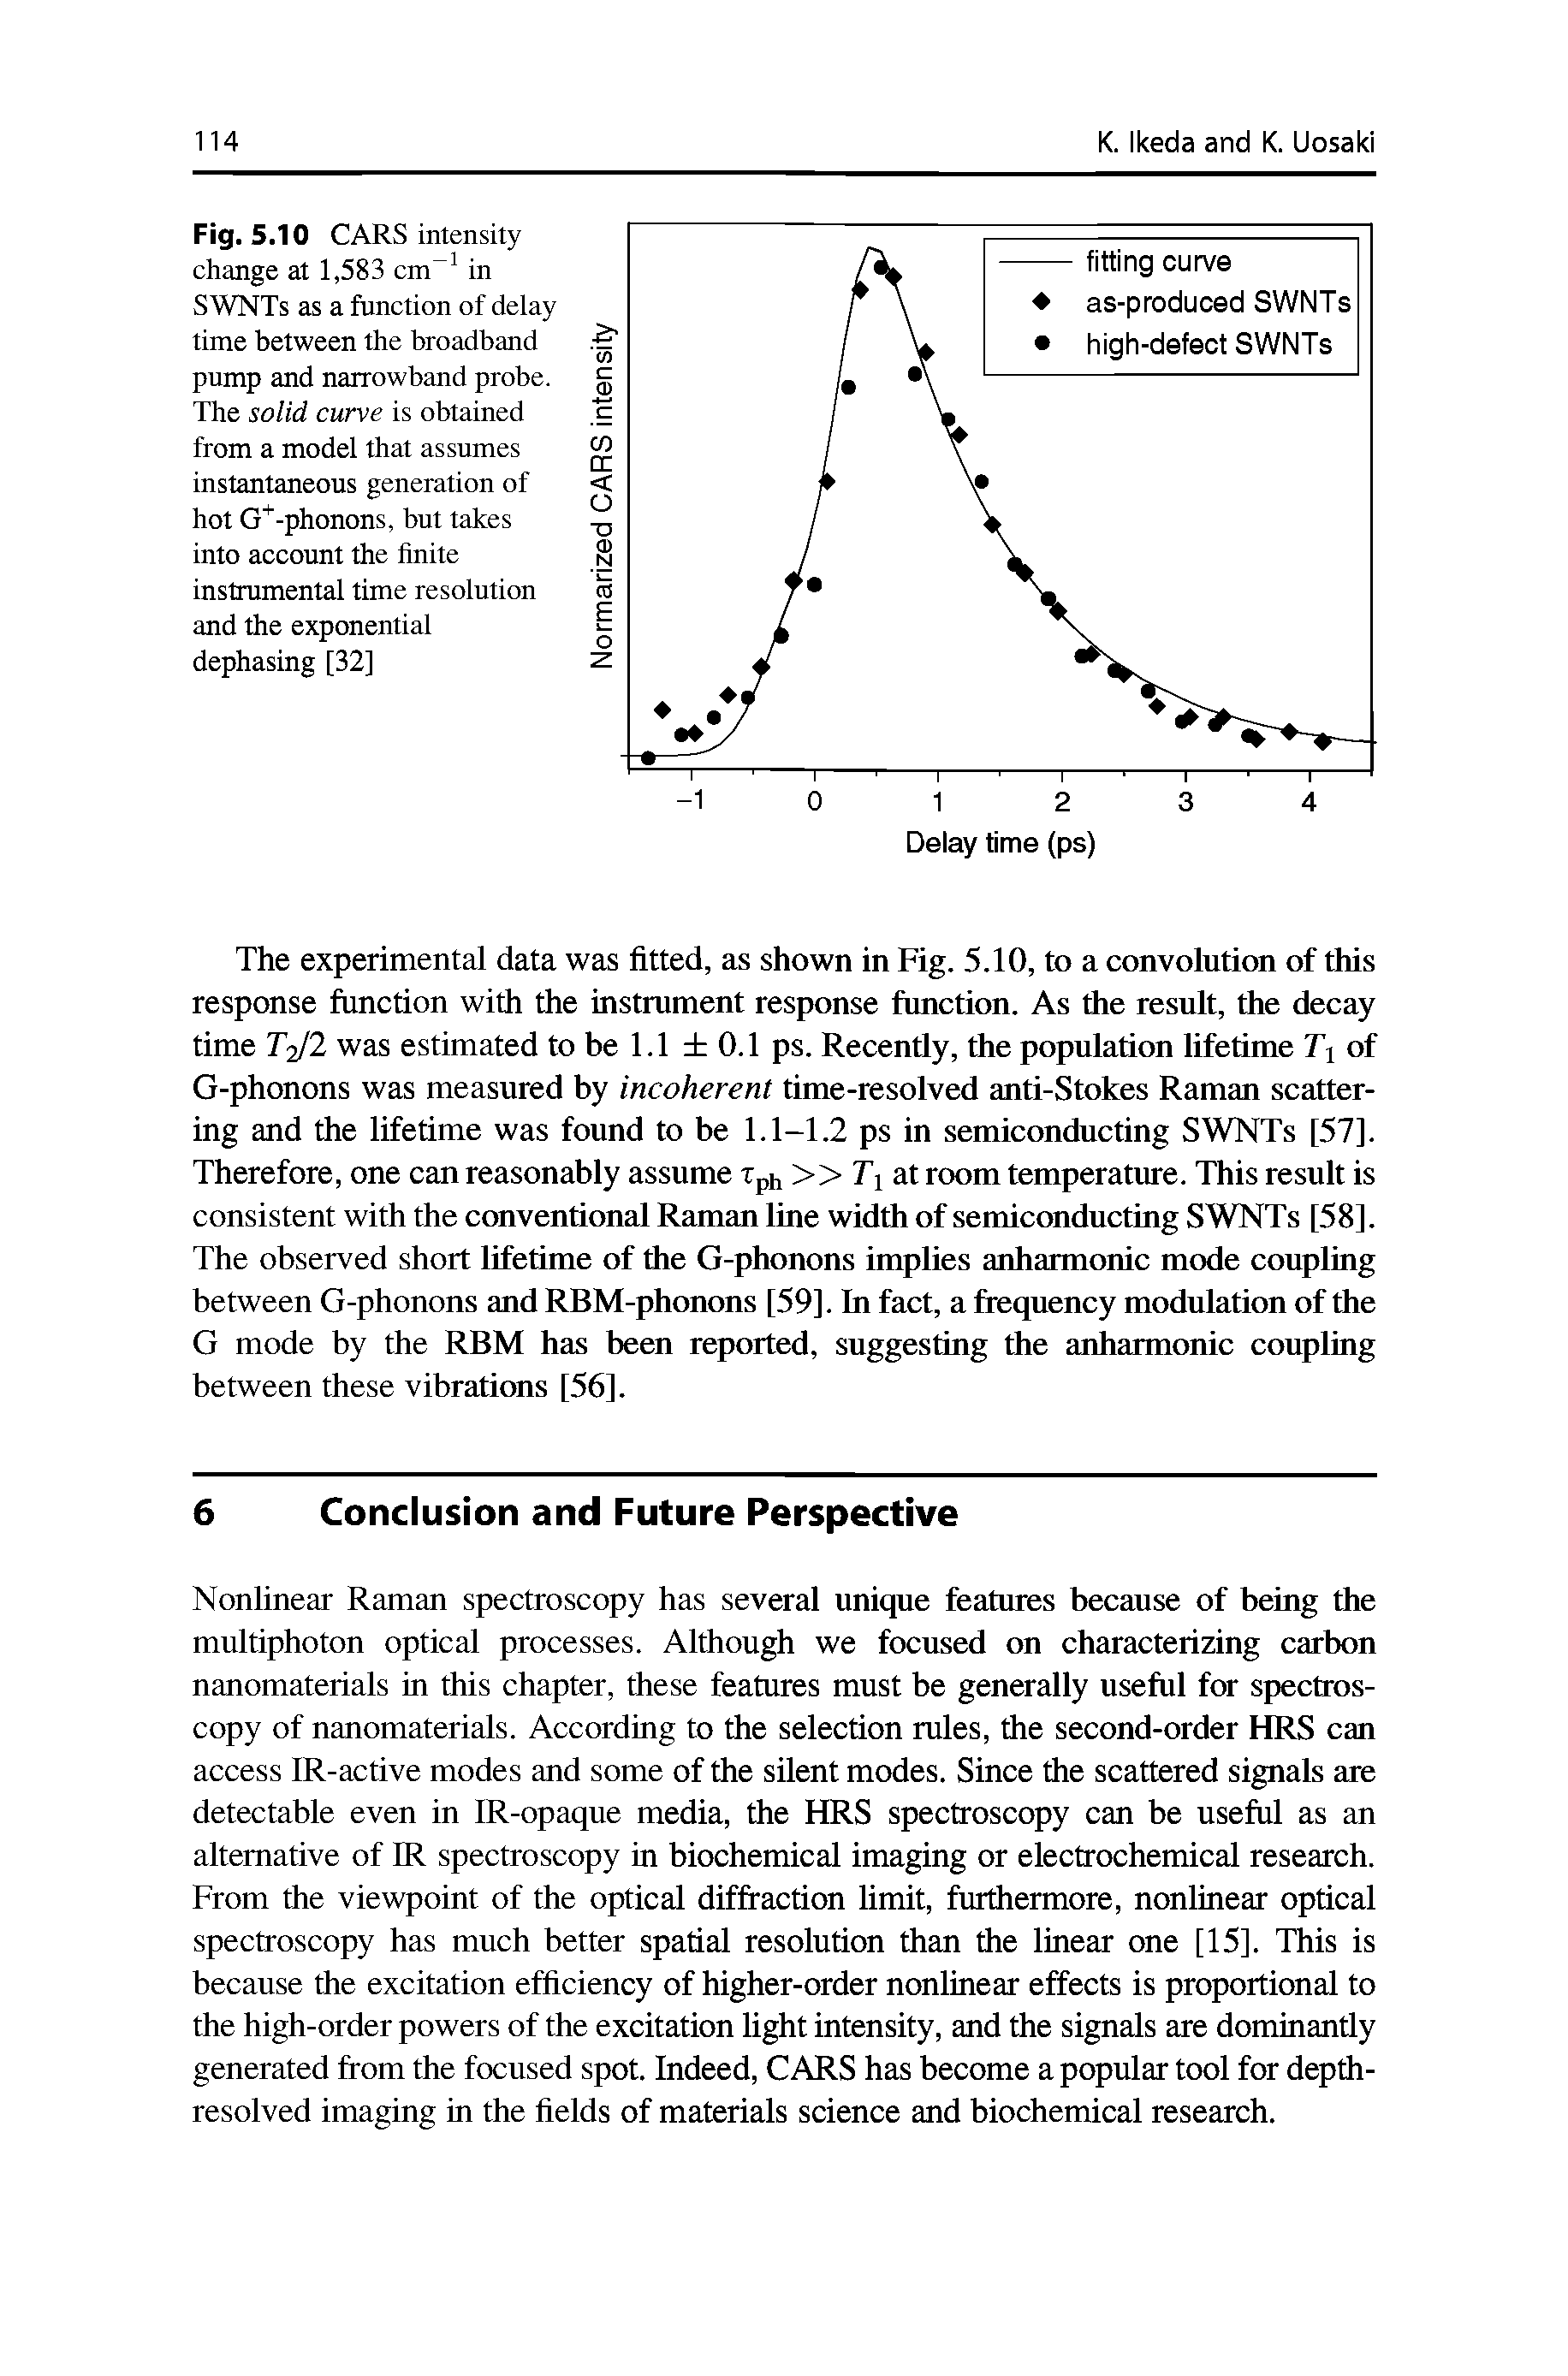 Fig. 5.10 CARS intensity change at 1,583 cm in SWNTs as a function of delay time between the broadband pump and narrowband probe. The solid curve is obtained from a model that assumes instantaneous generation of hot G -phonons, but takes into account the finite instrumental time resolution and the exponential dephasing [32]...